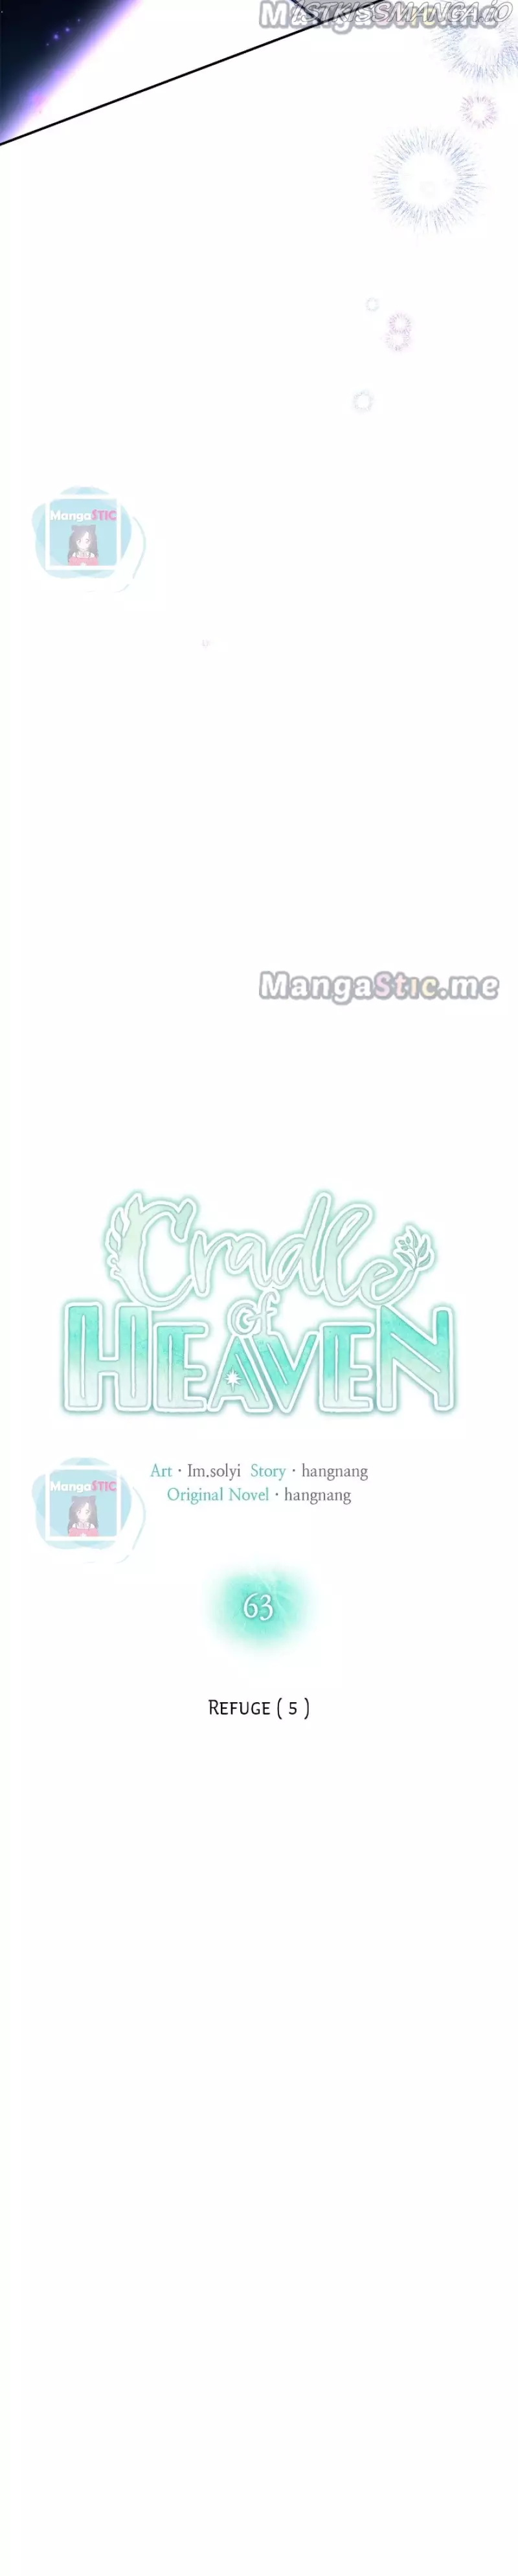 Cradle Of Heaven - 63 page 14-84155871